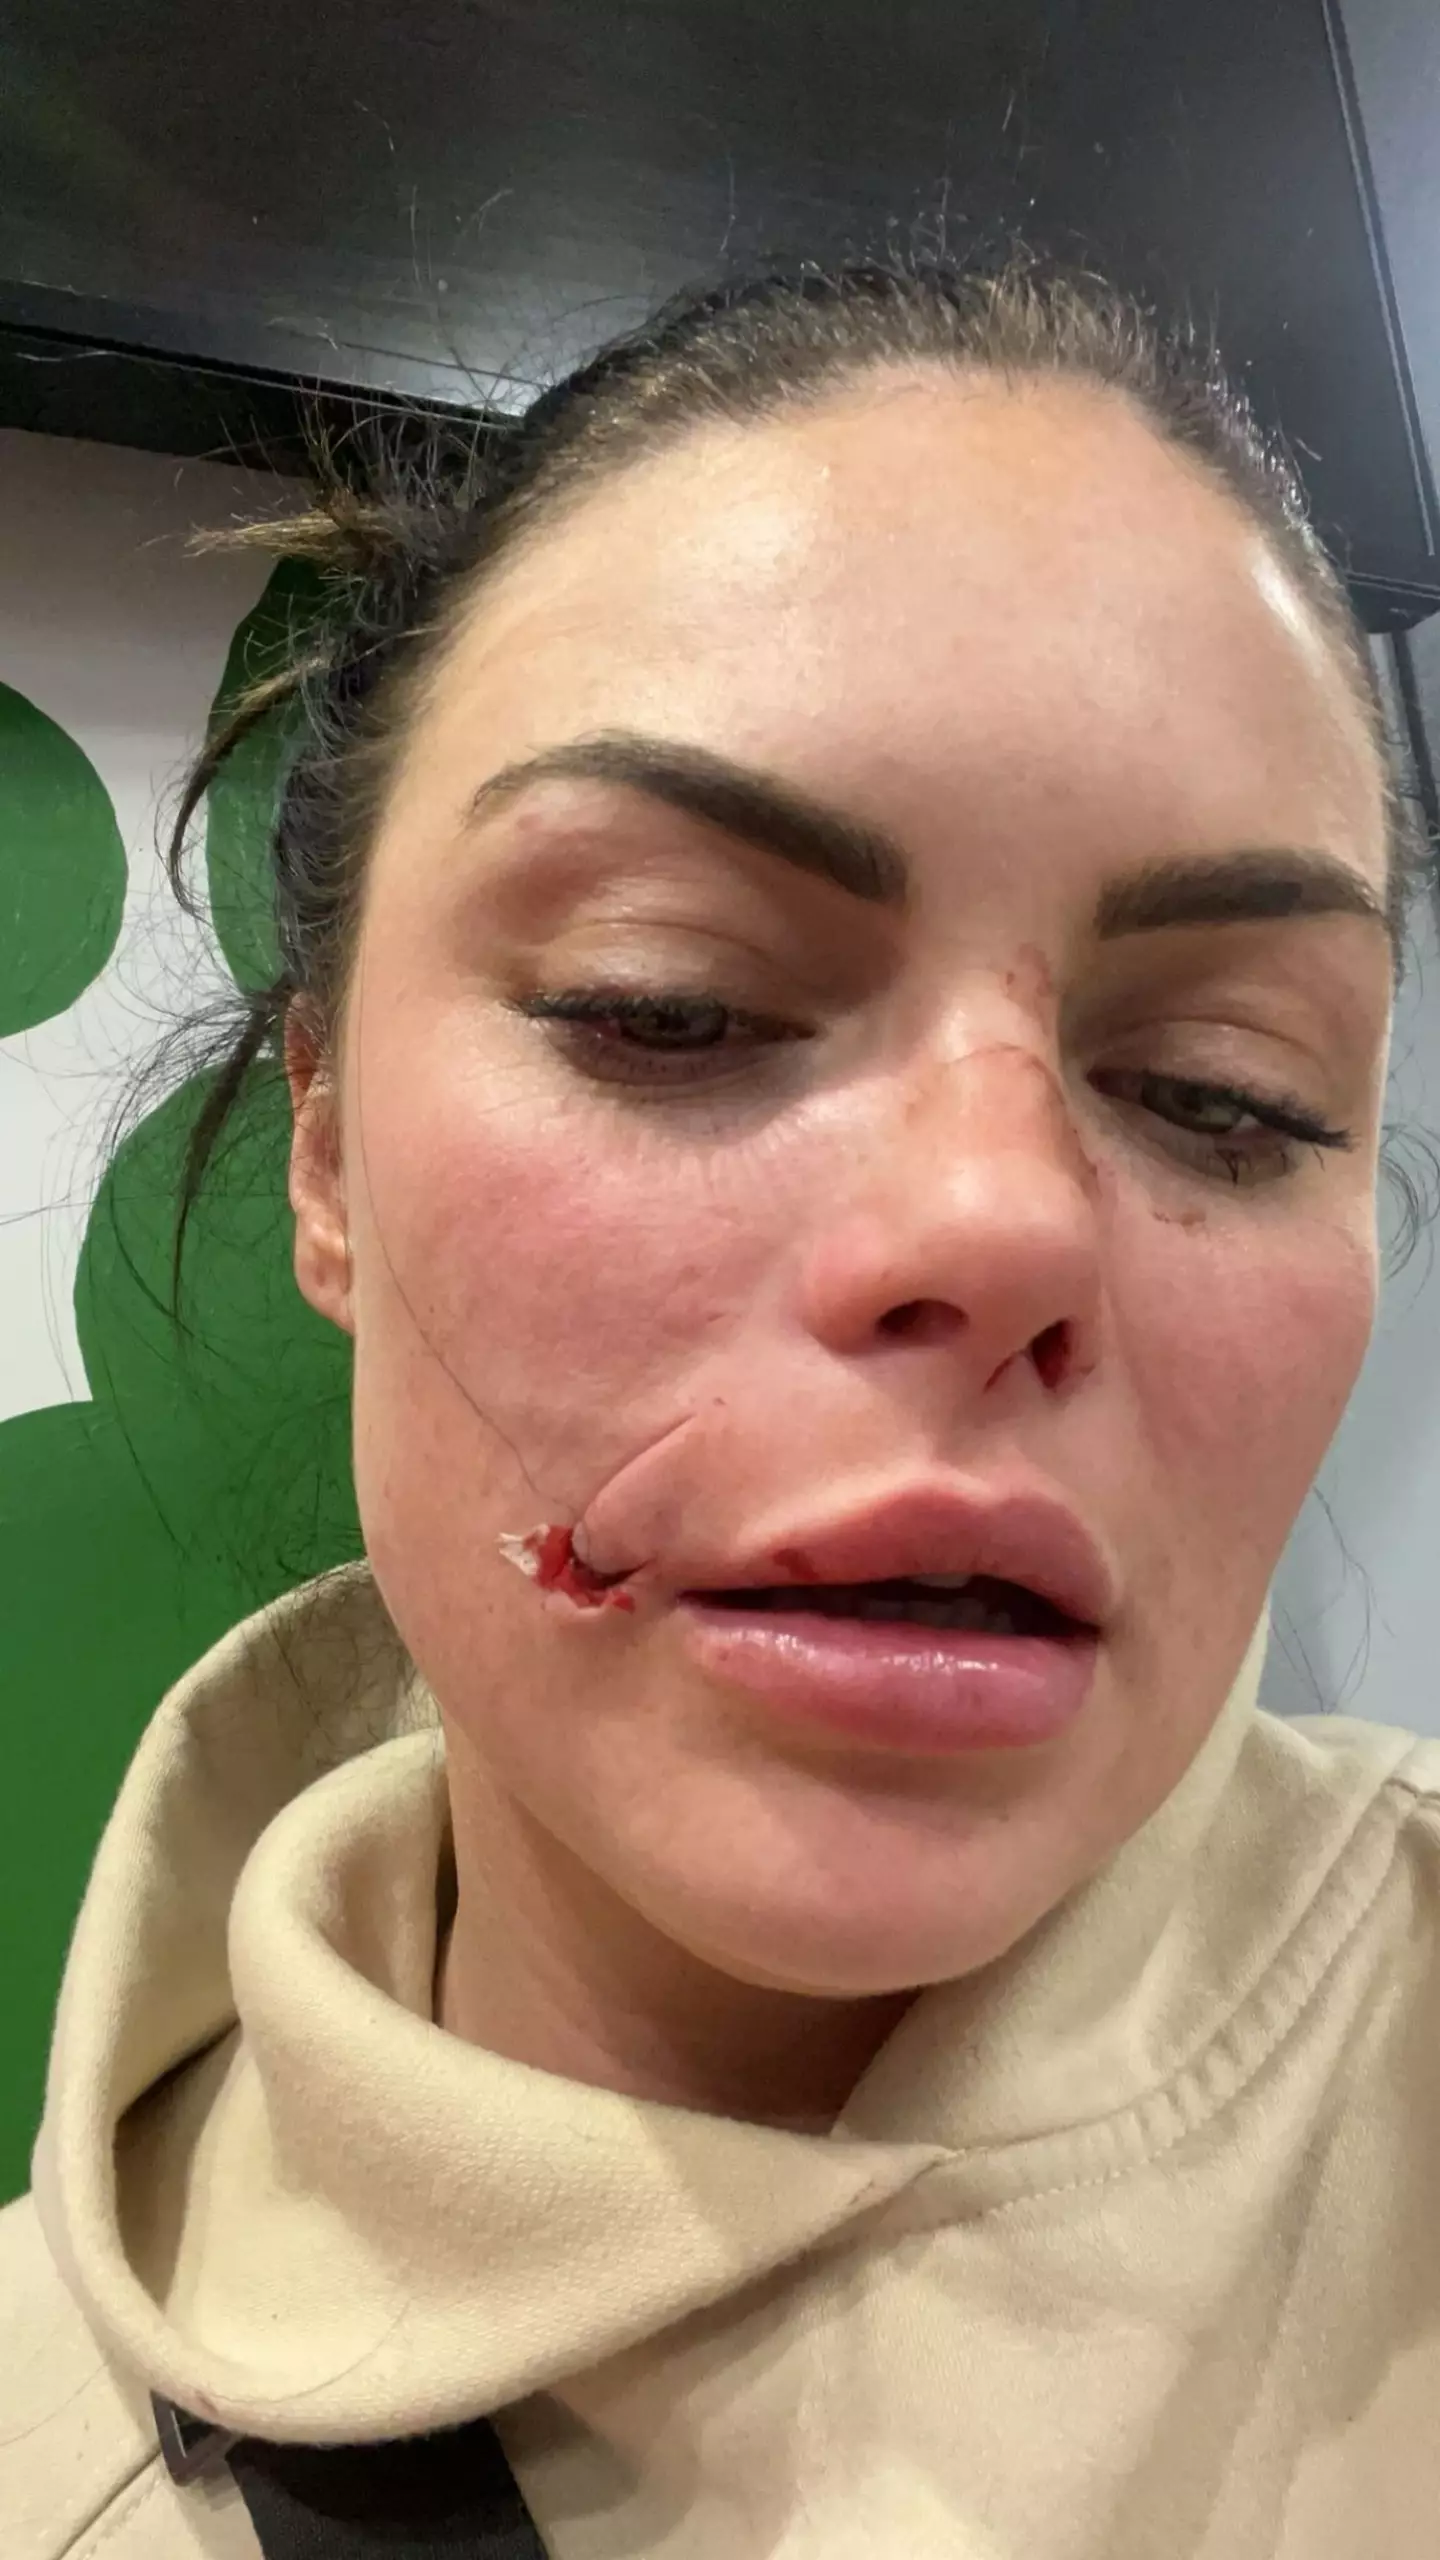 Kelsea Morgan was attacked by her friend's dog.